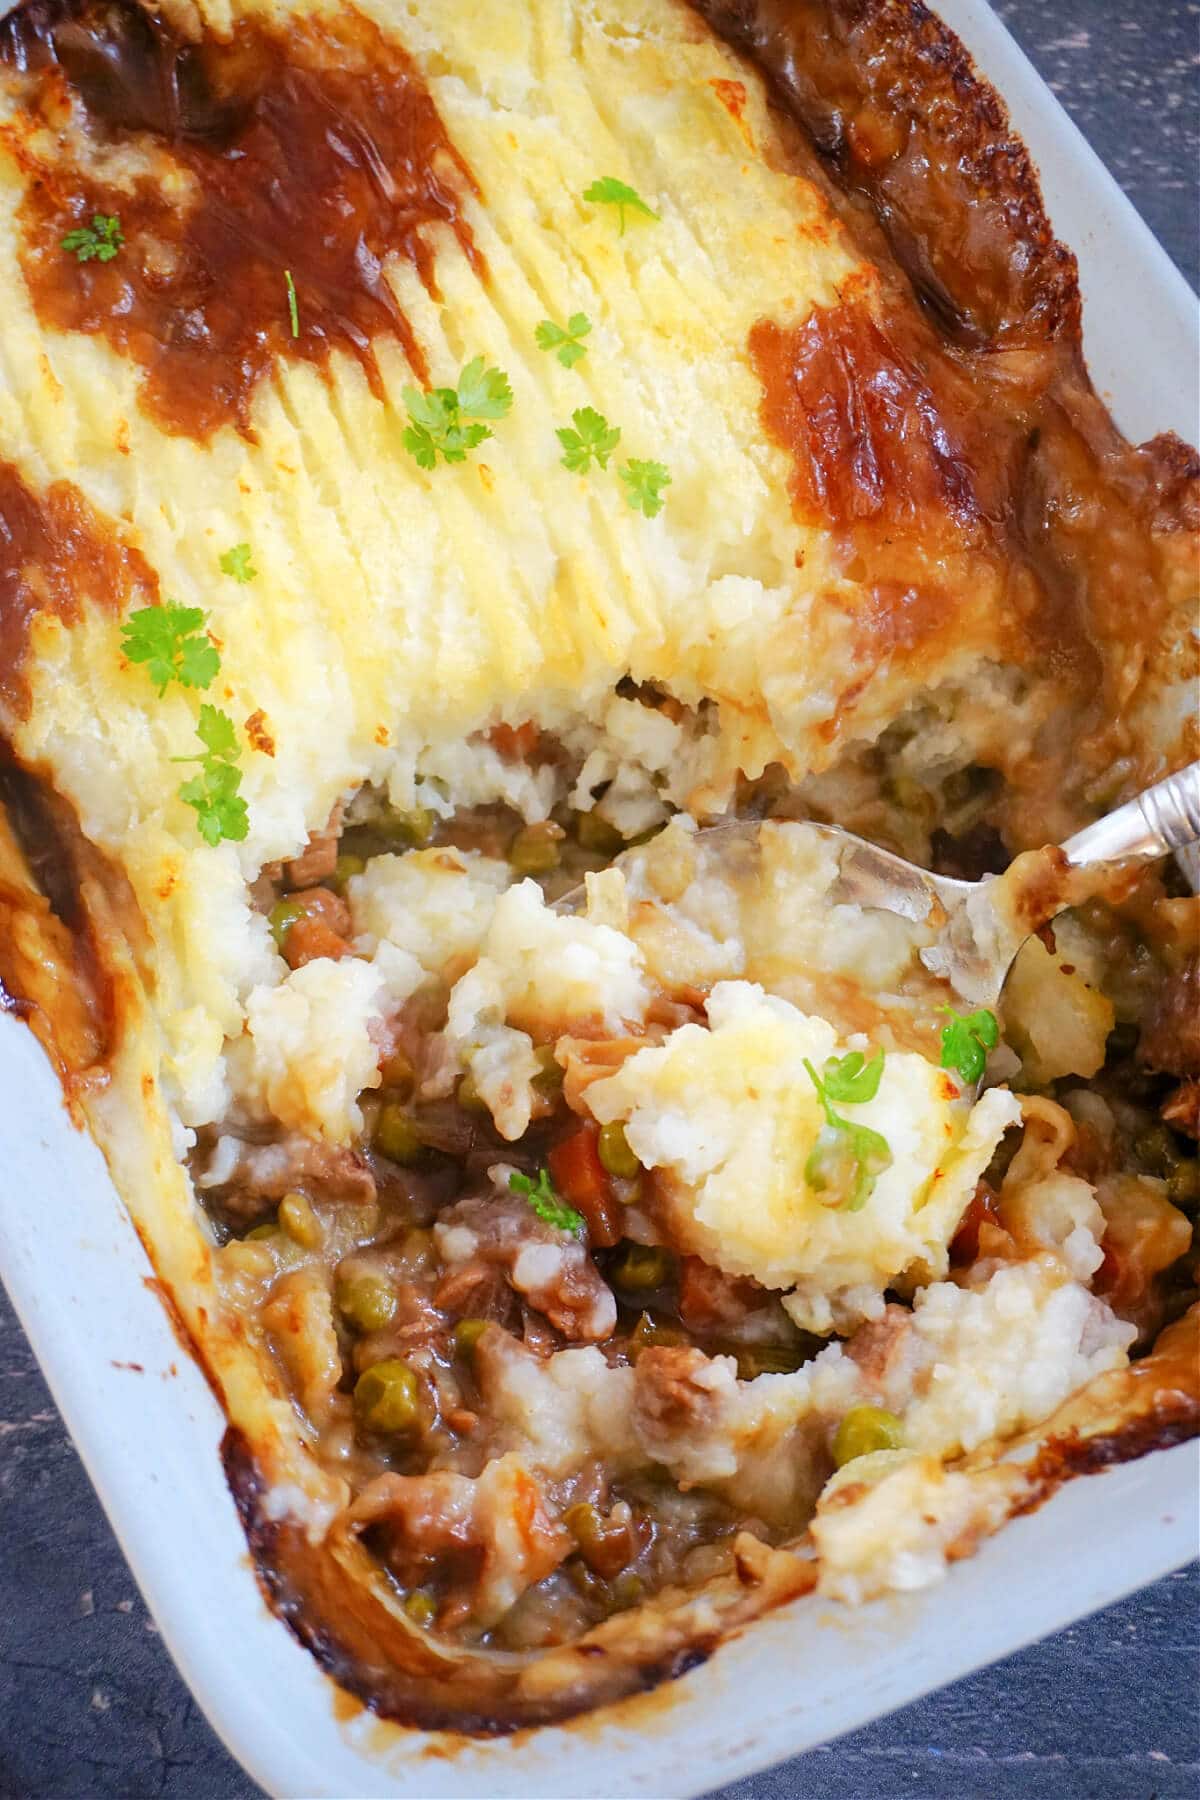 Overhead shot of a dish with leftover beef cottage pie.